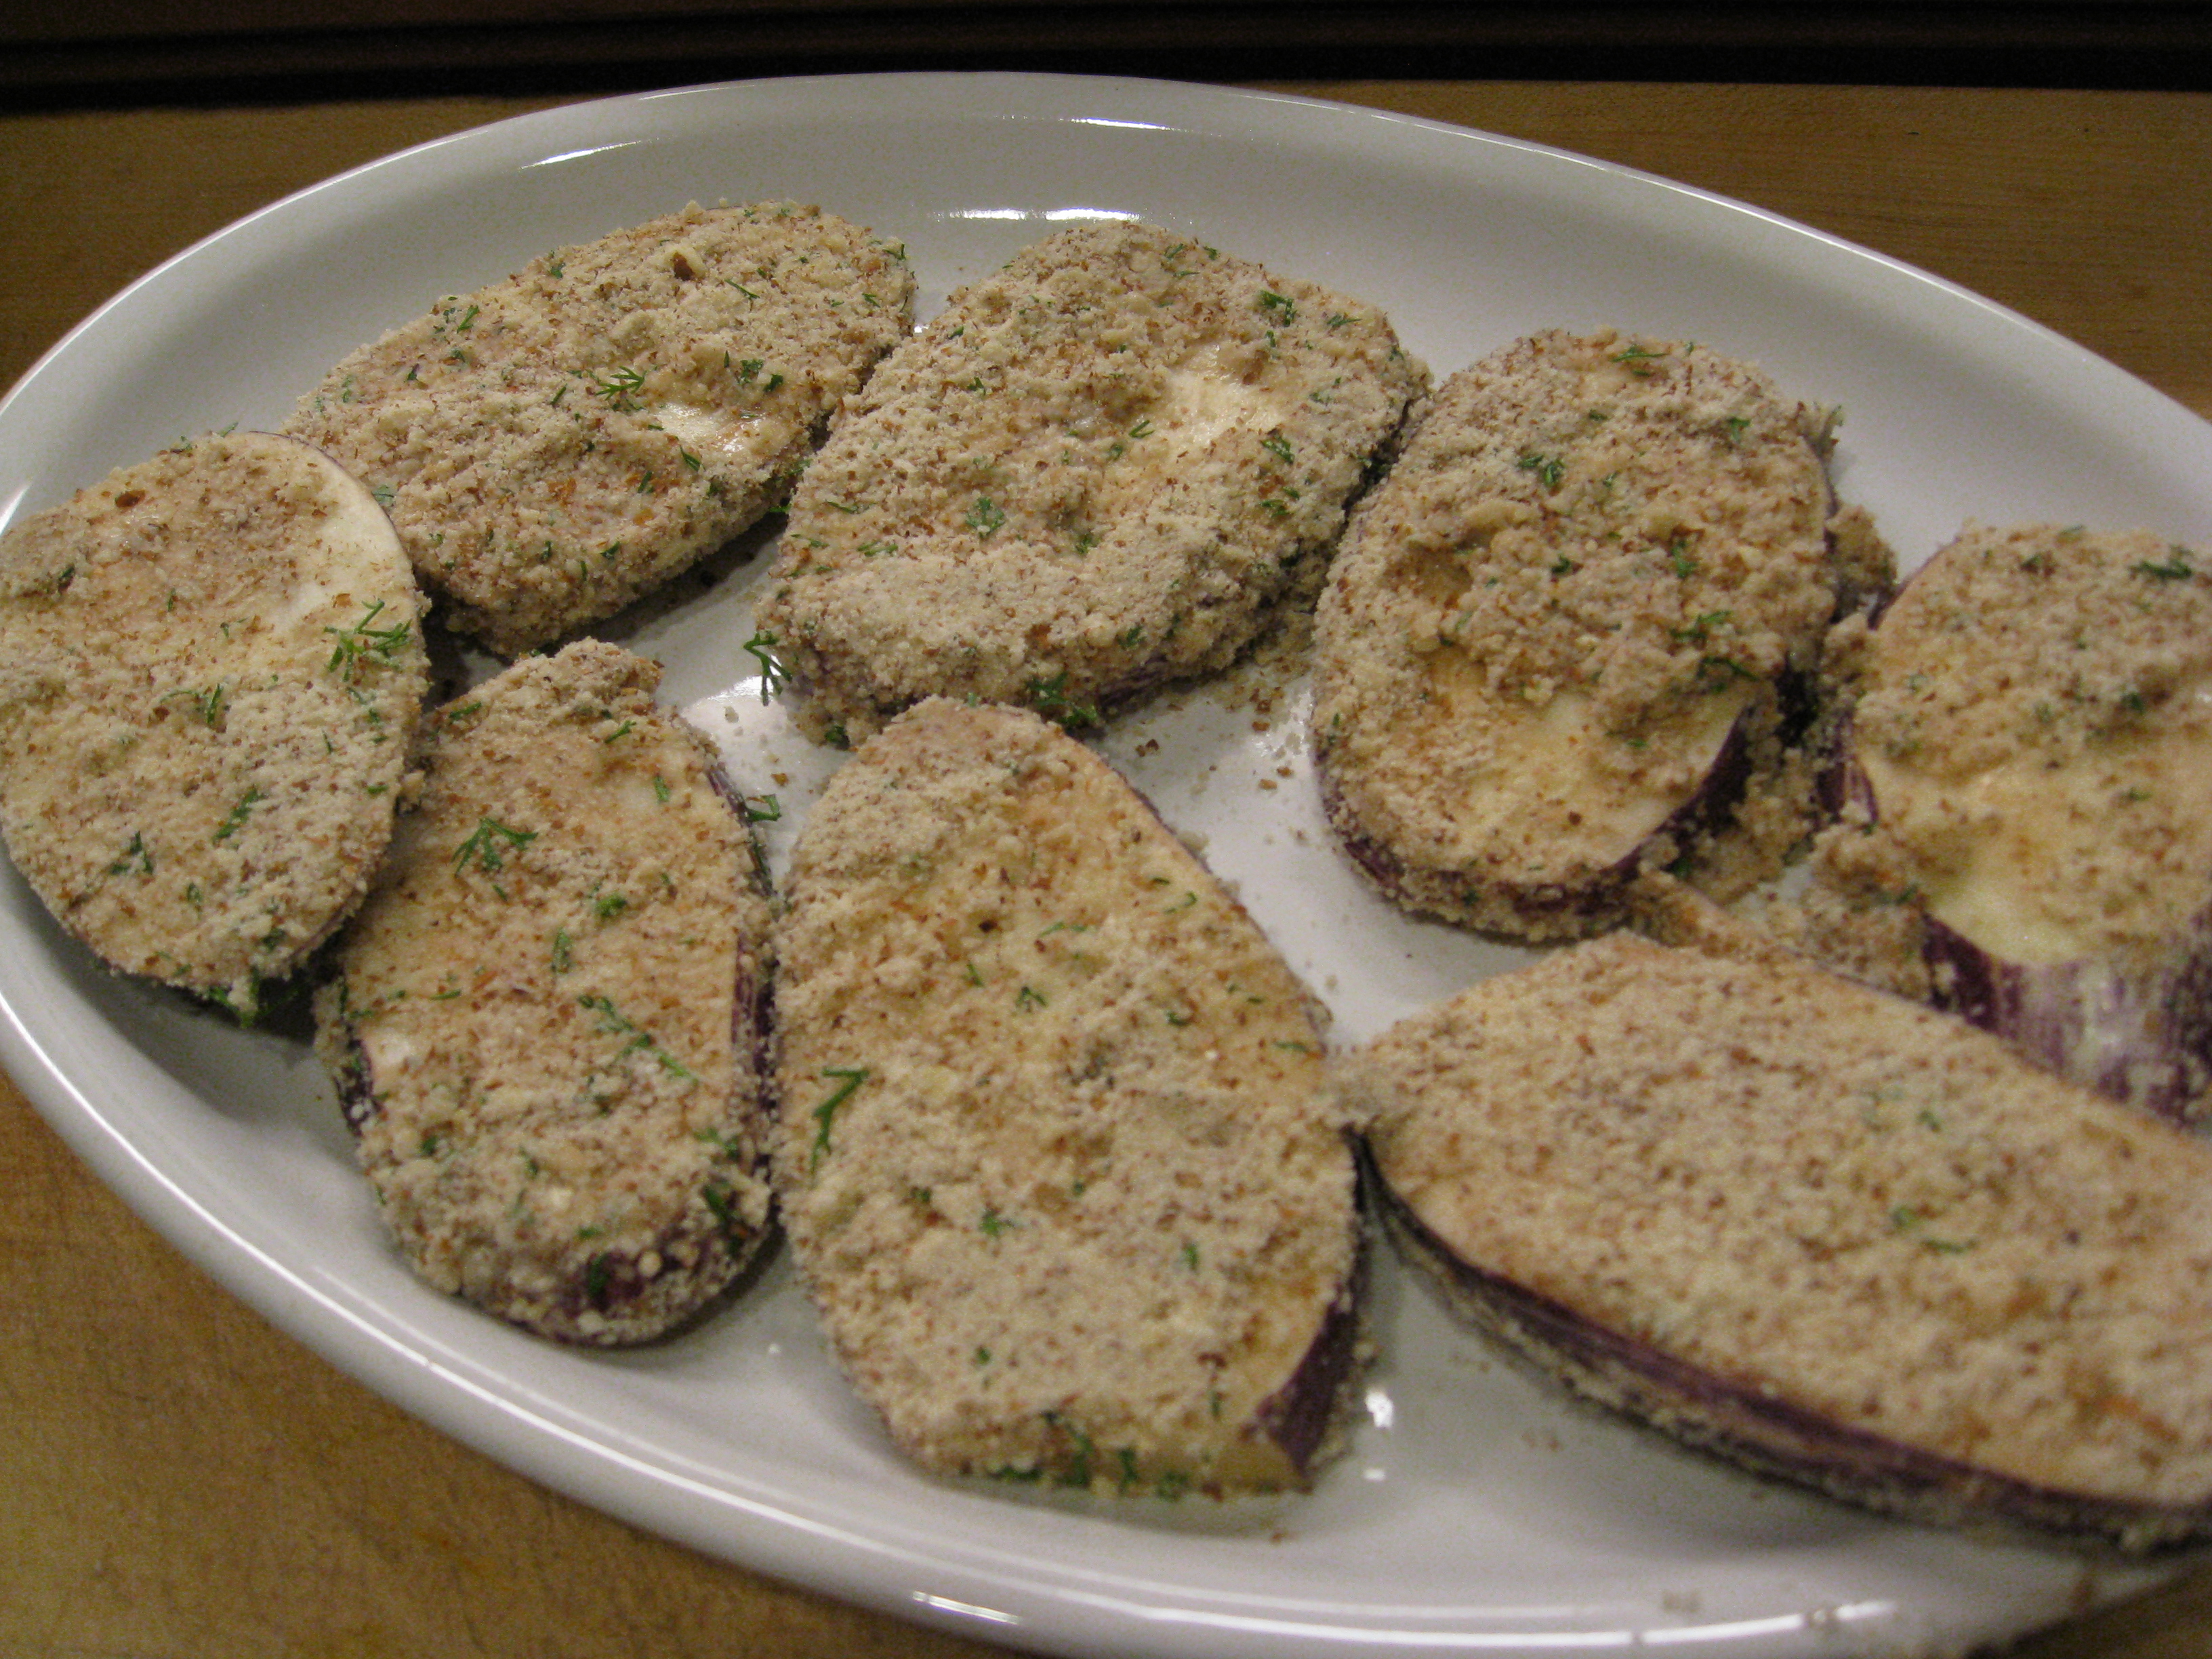 Coated with almonds and herbs, these eggplants are ready for the fire.